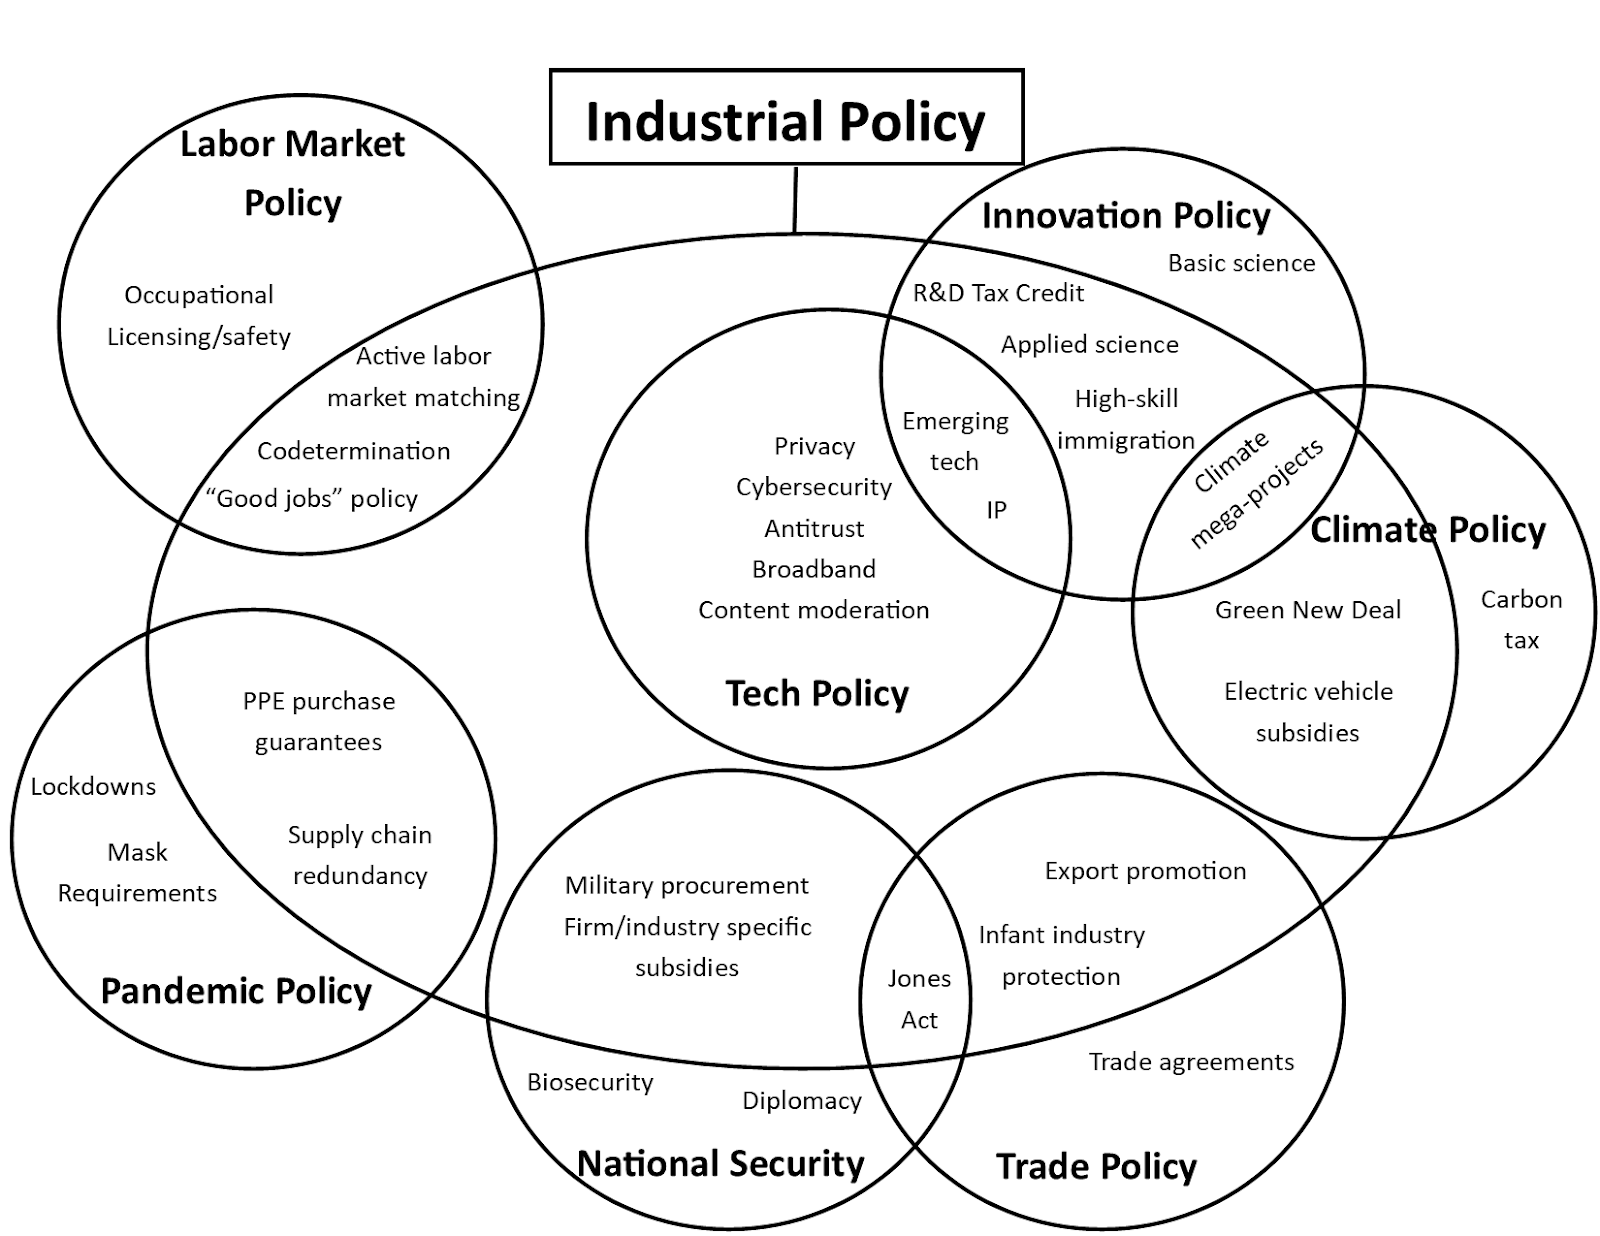 On Defining “Industrial Policy”